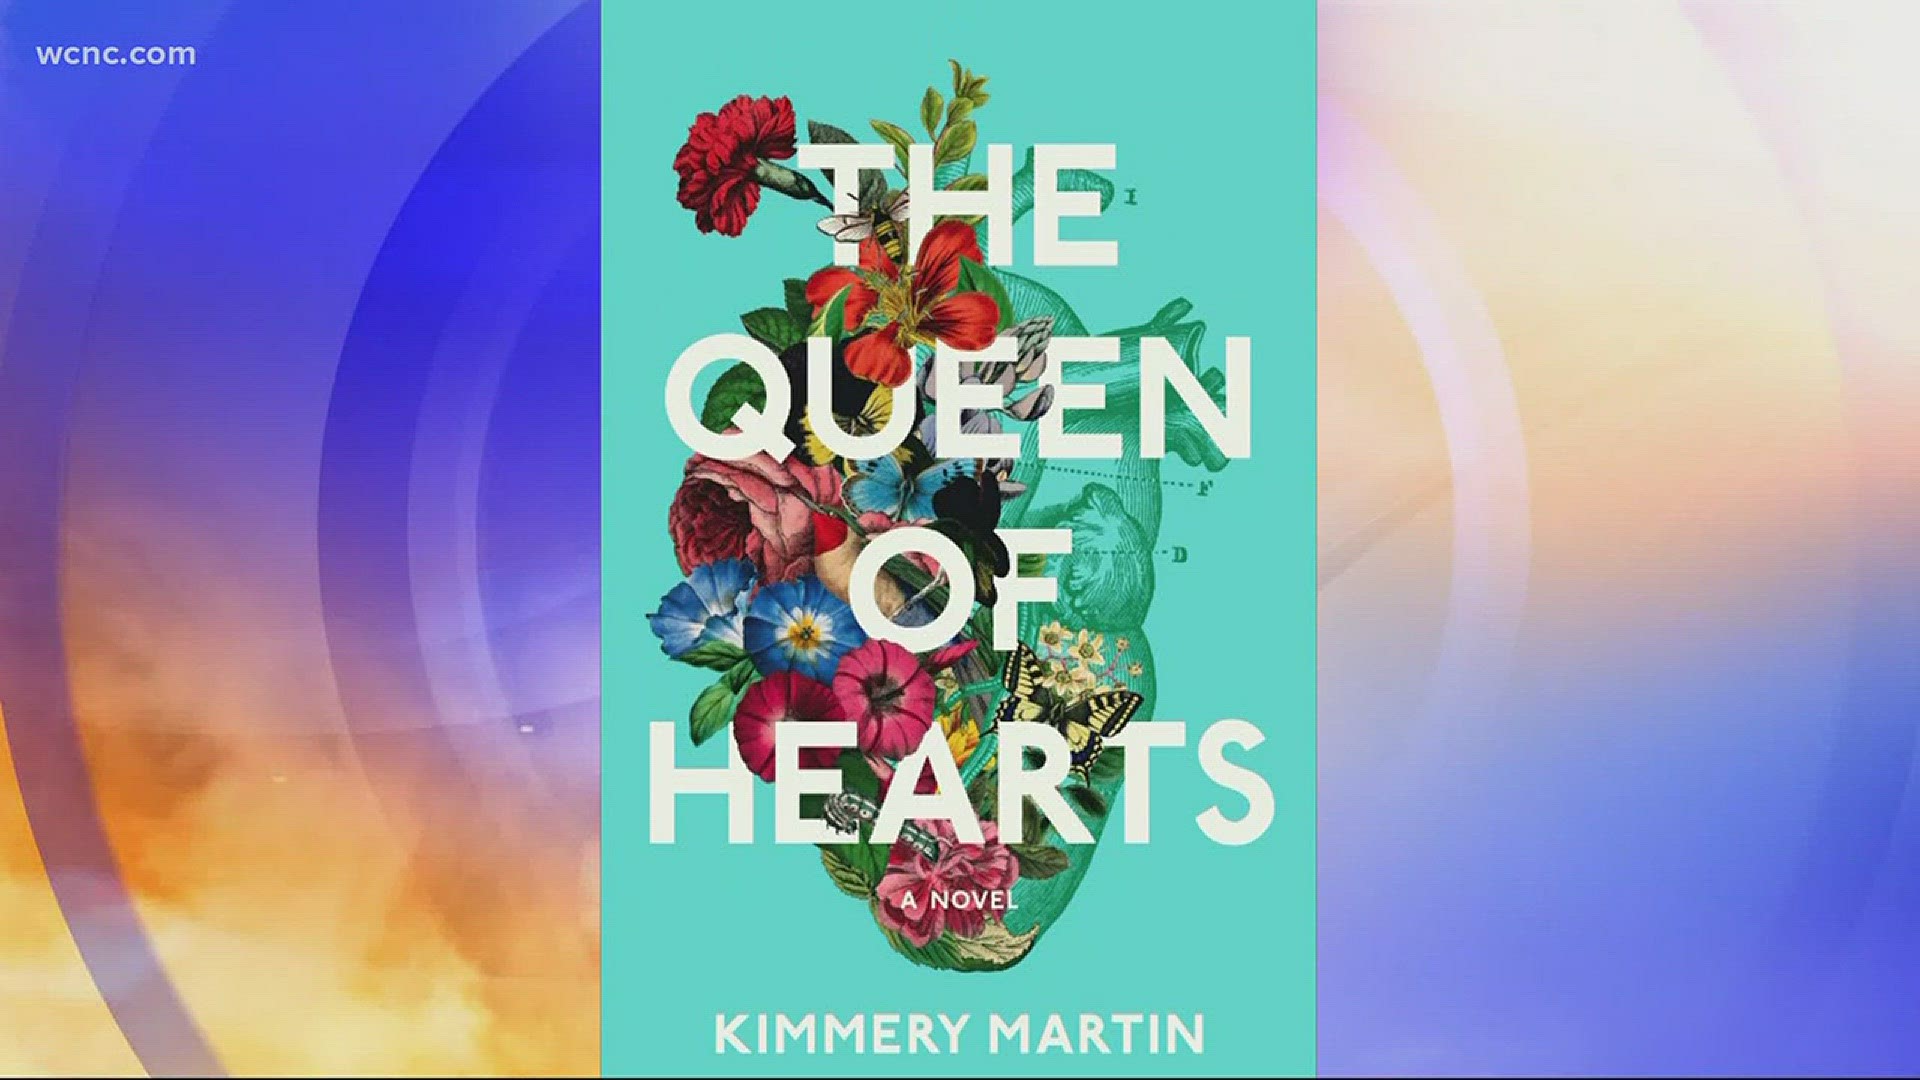 Author Kimmery Martin tells us about the experiences that helped her write her book.